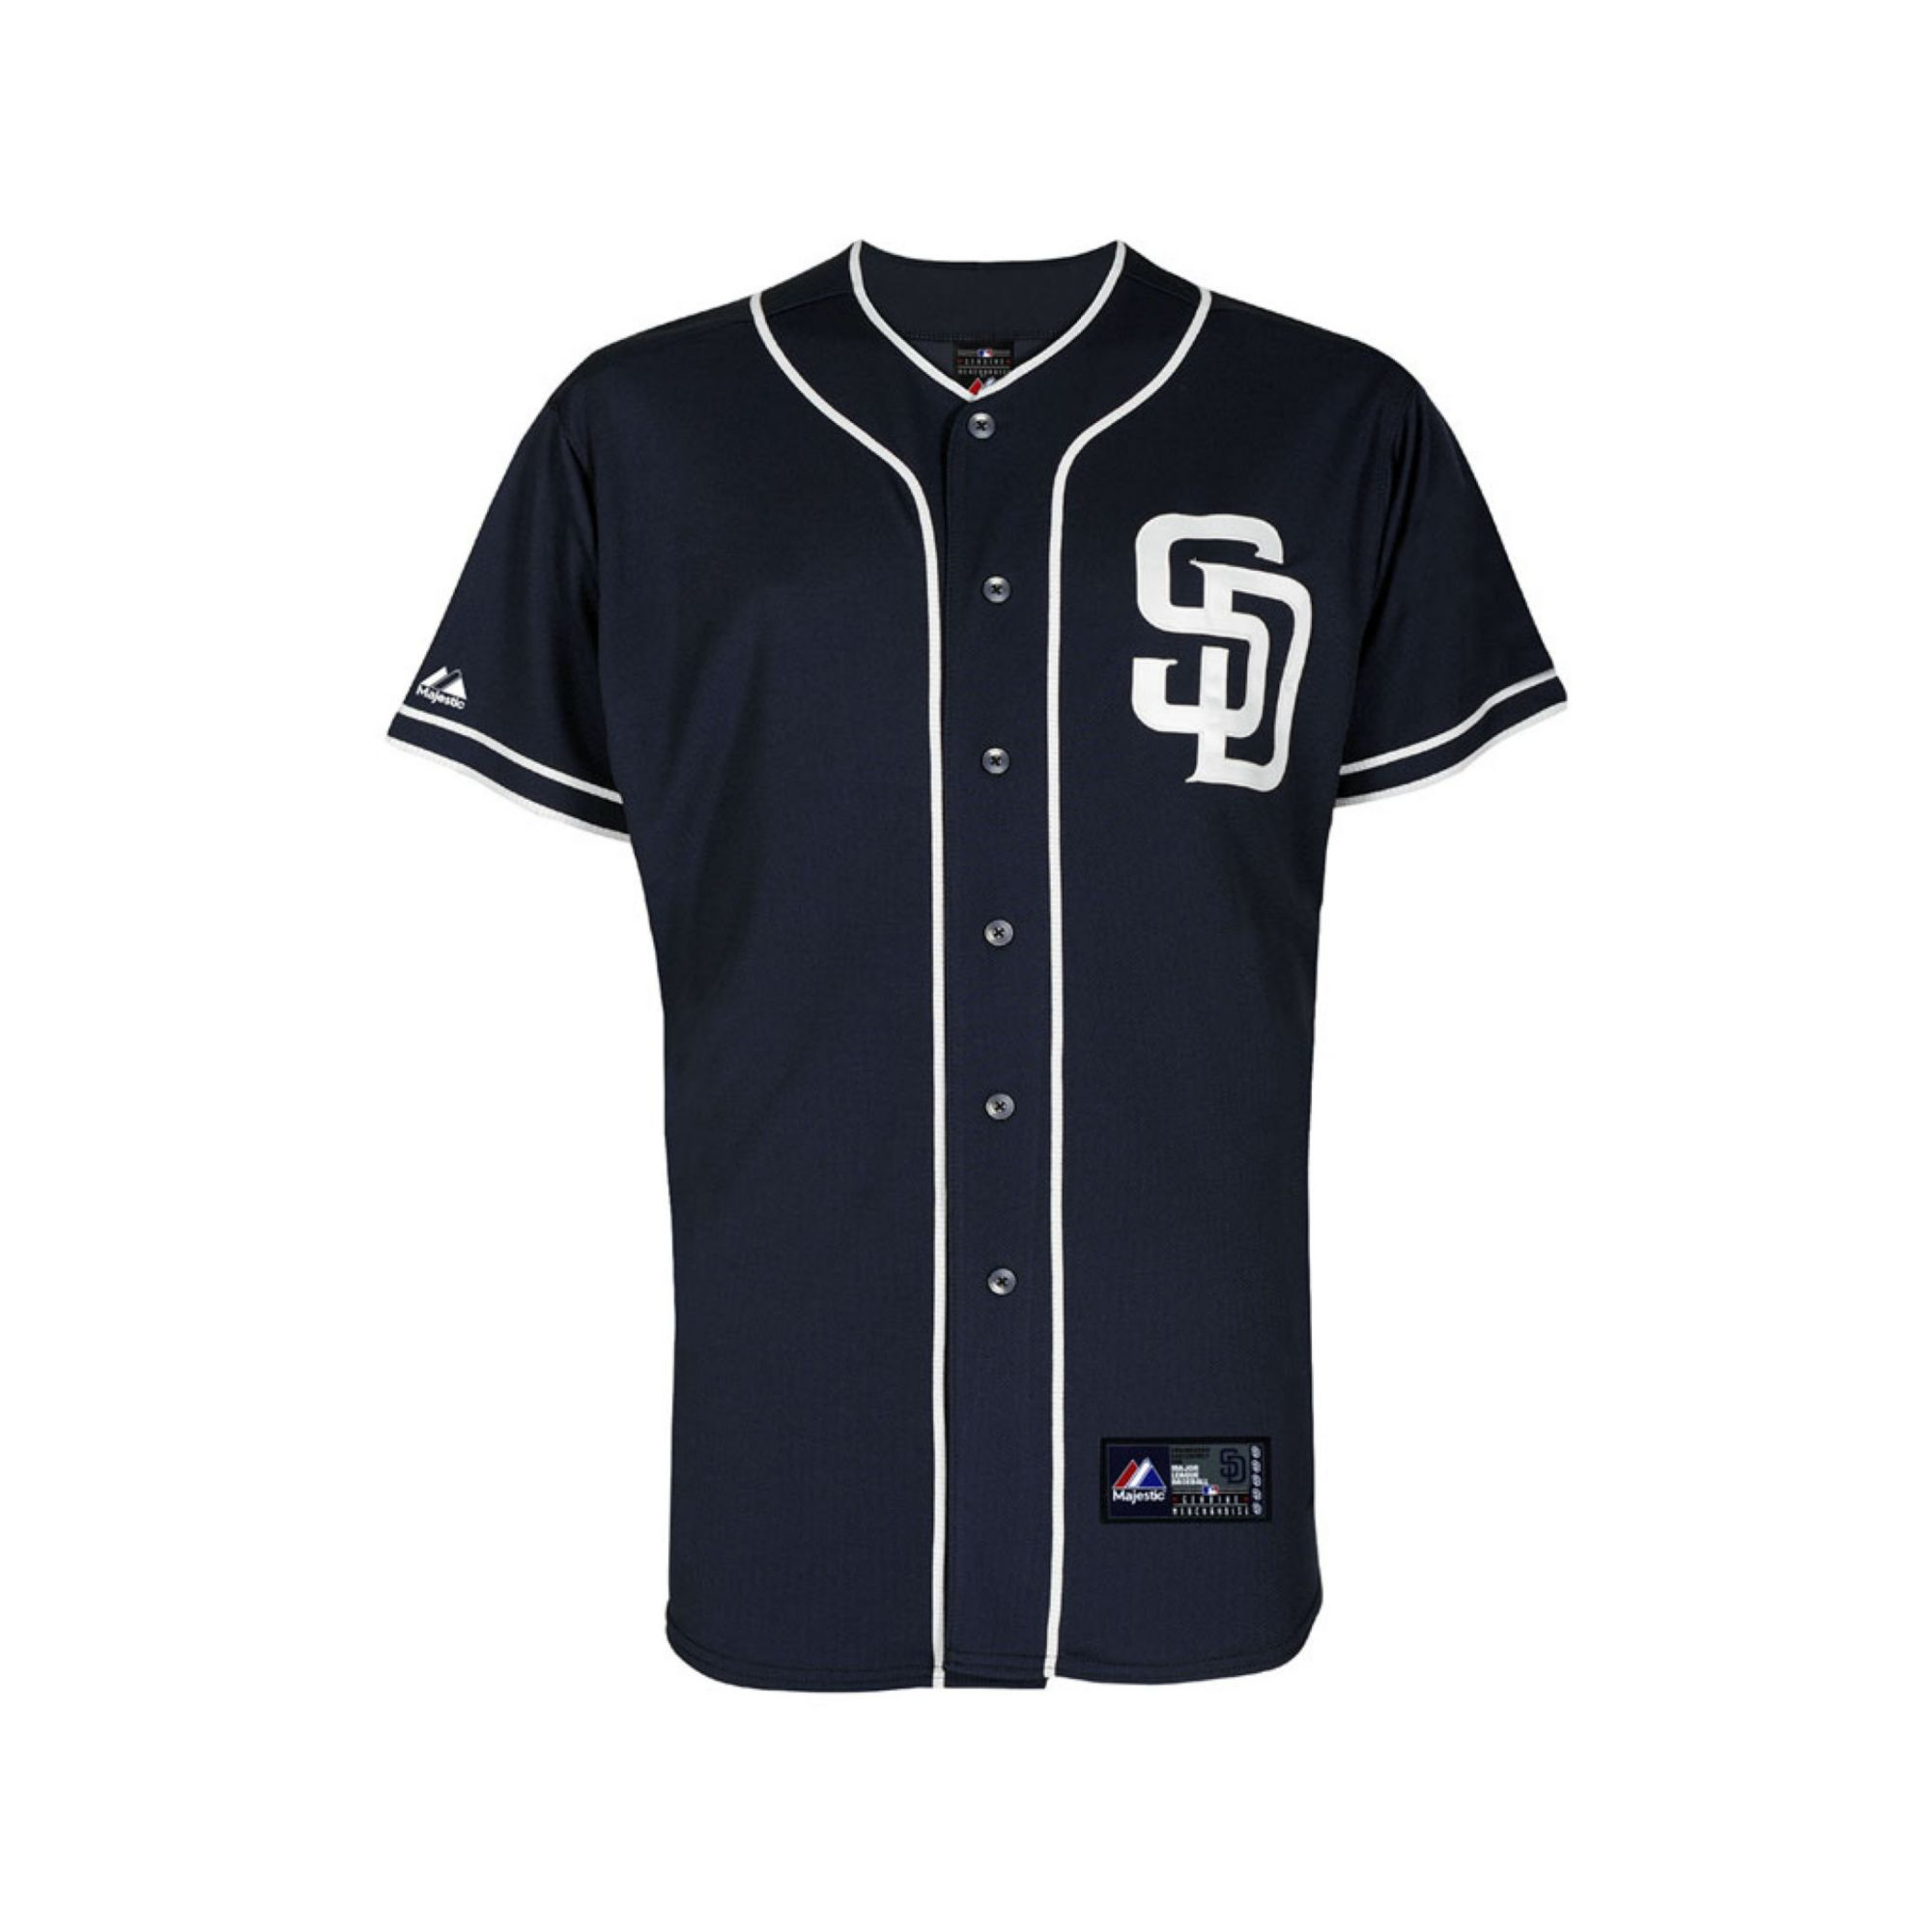 Majestic Mens San Diego Padres Blank Replica Jersey in ...